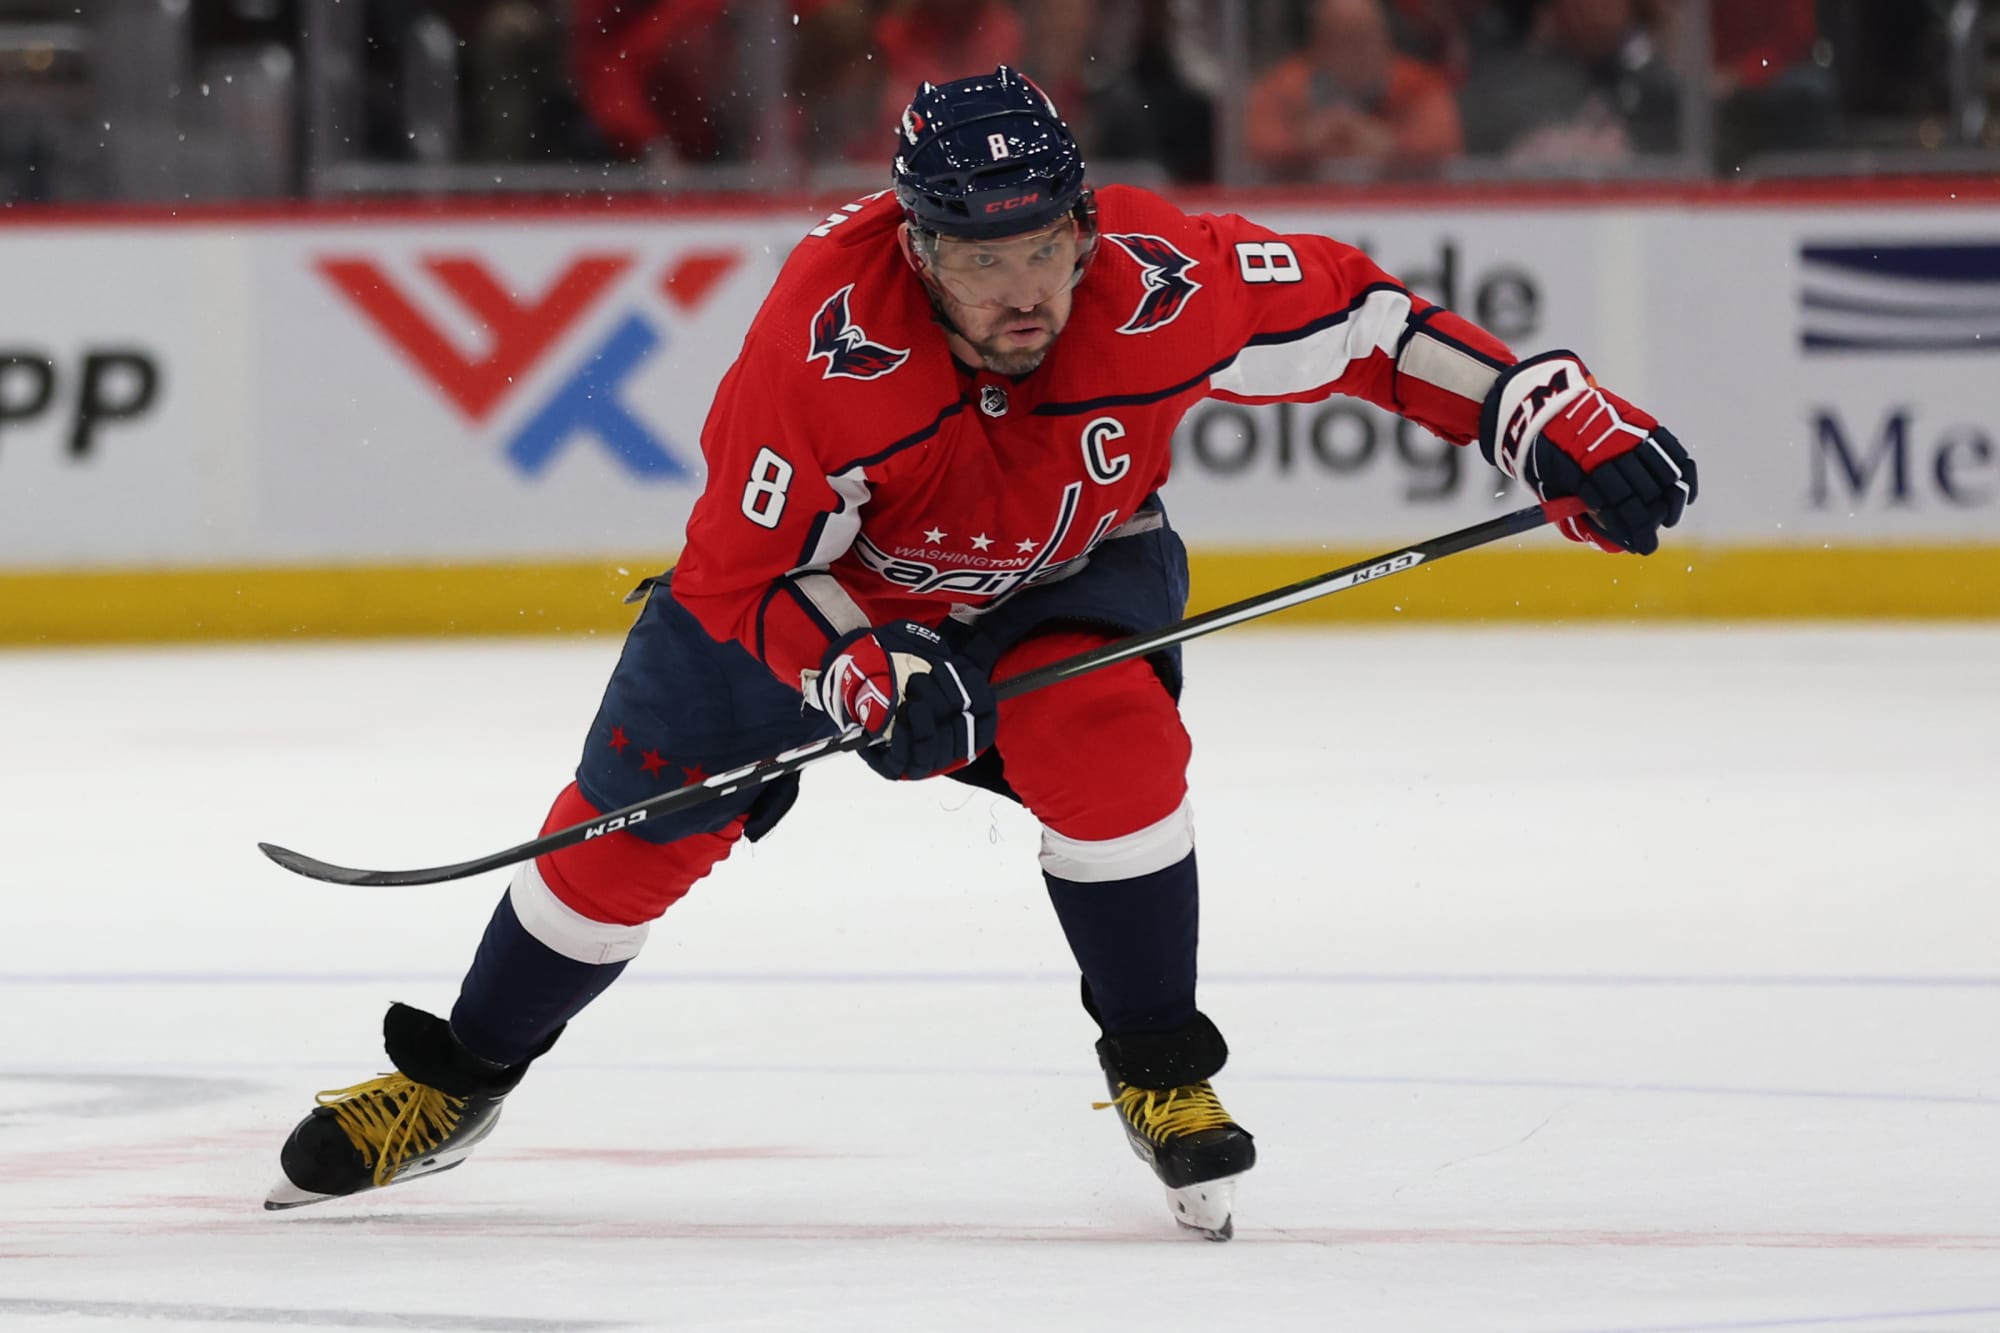 NHL 23 Top 10 Left Wings revealed: Did Alex Ovechkin get snubbed?